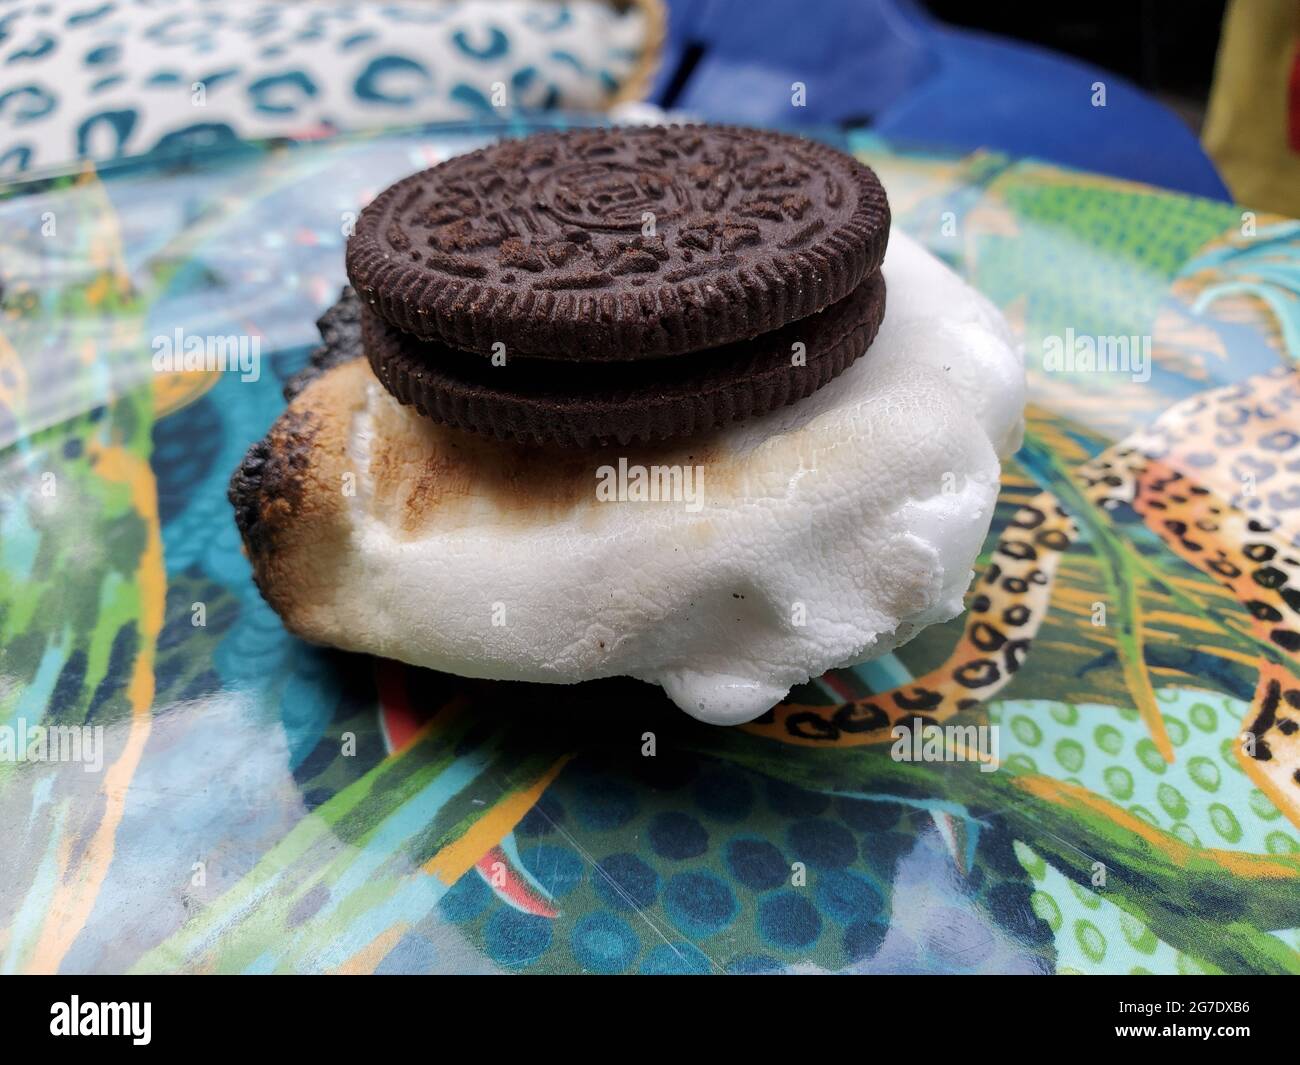 Close-up of Oreo Cookie smore on colorful plate, Lafayette, California, June 7, 2021. () Stock Photo